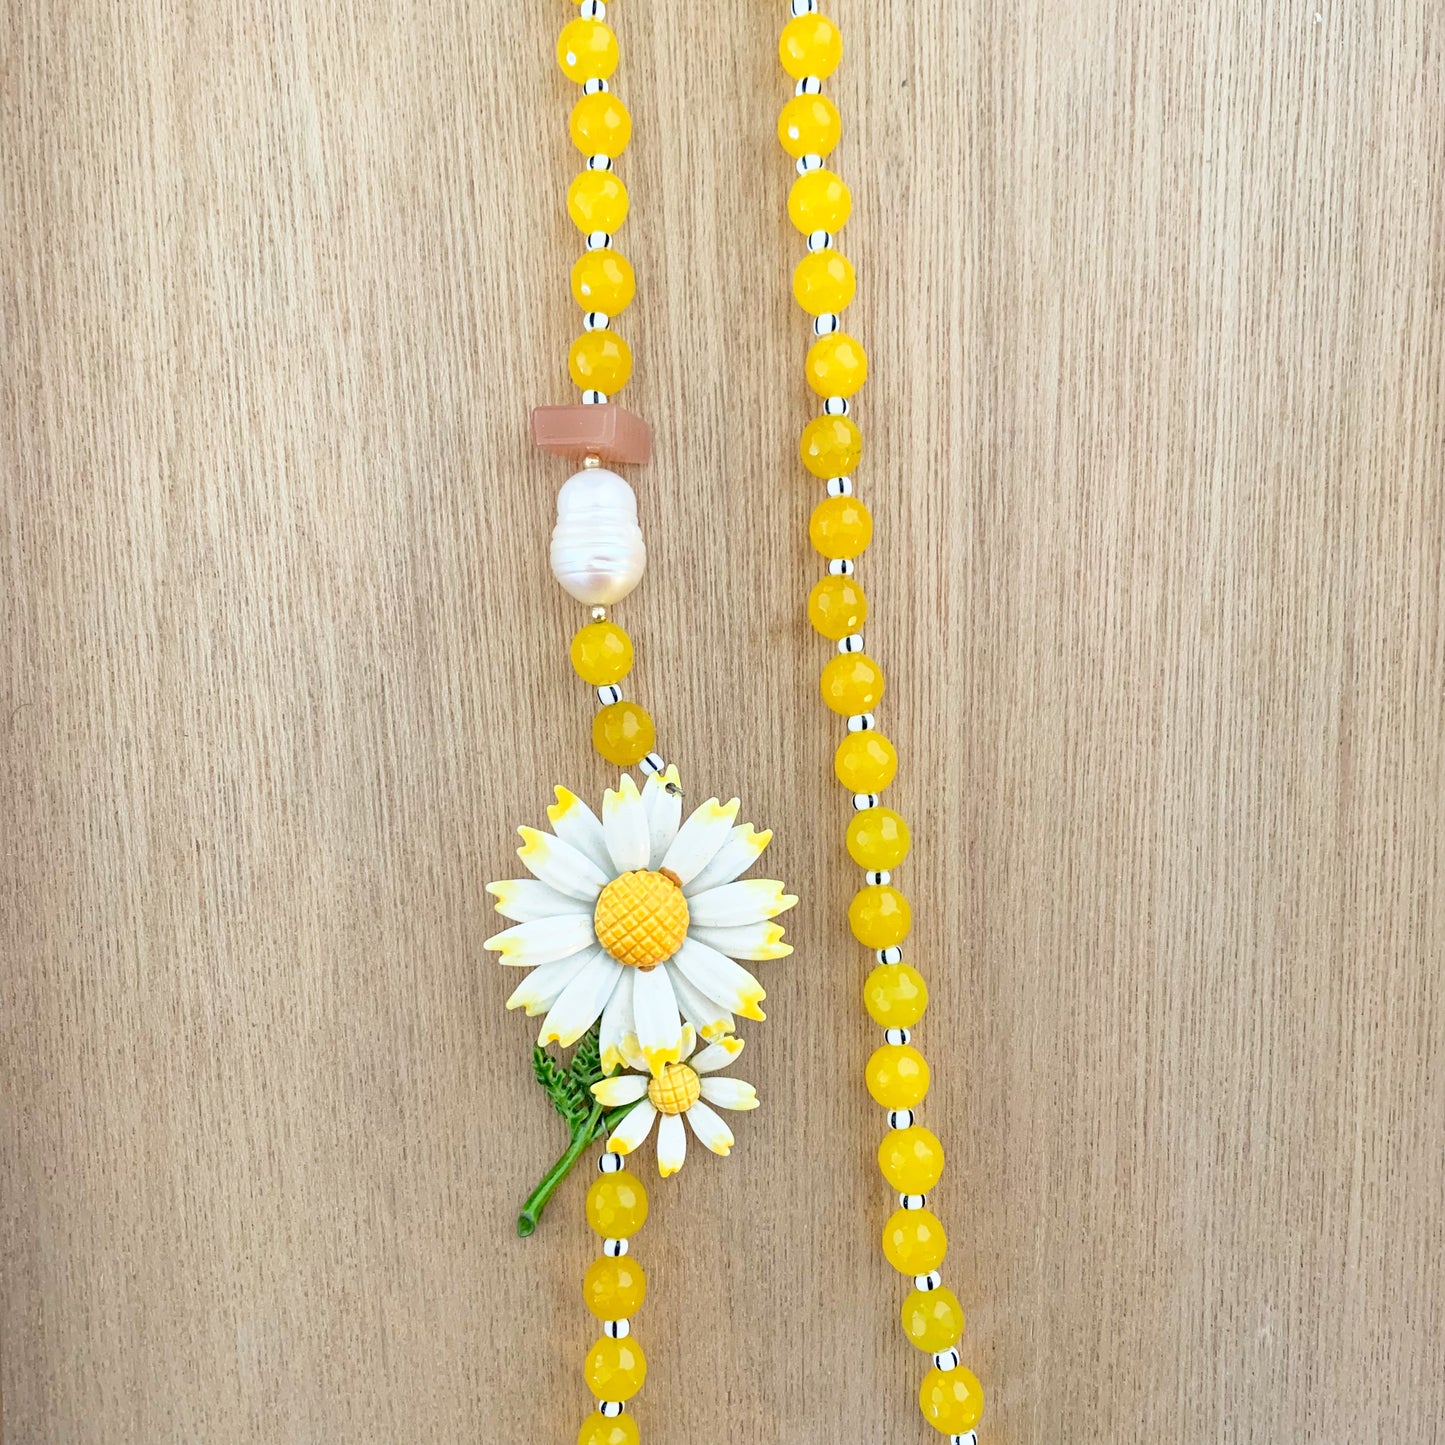 Baroque Pearlies: Yellow Daisies Necklace